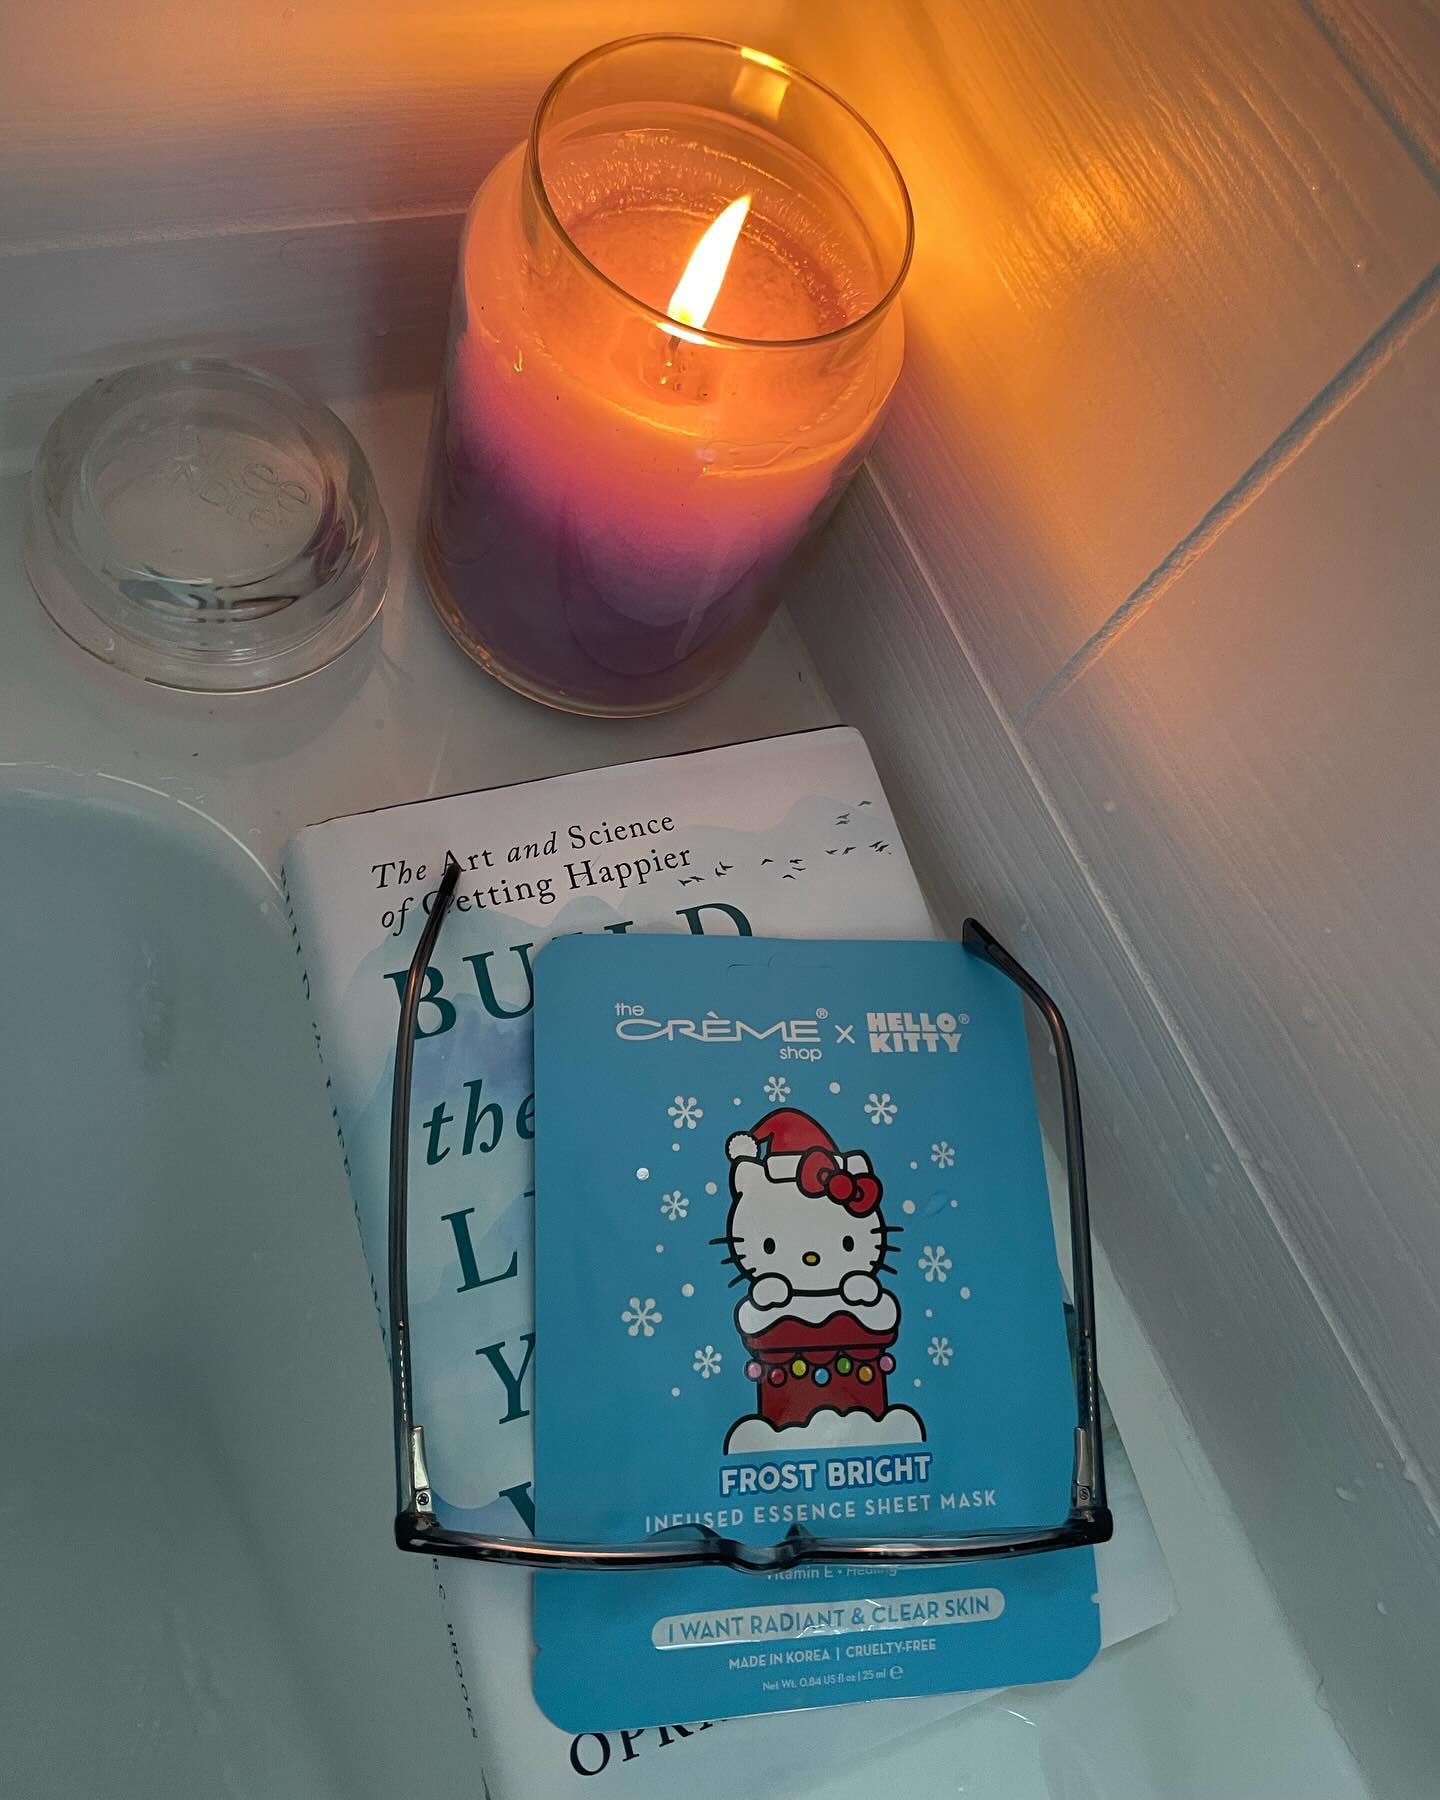 Perfect start to the week 🕯️ #selflove #reading #books #bath #candles #happiness #selfcare